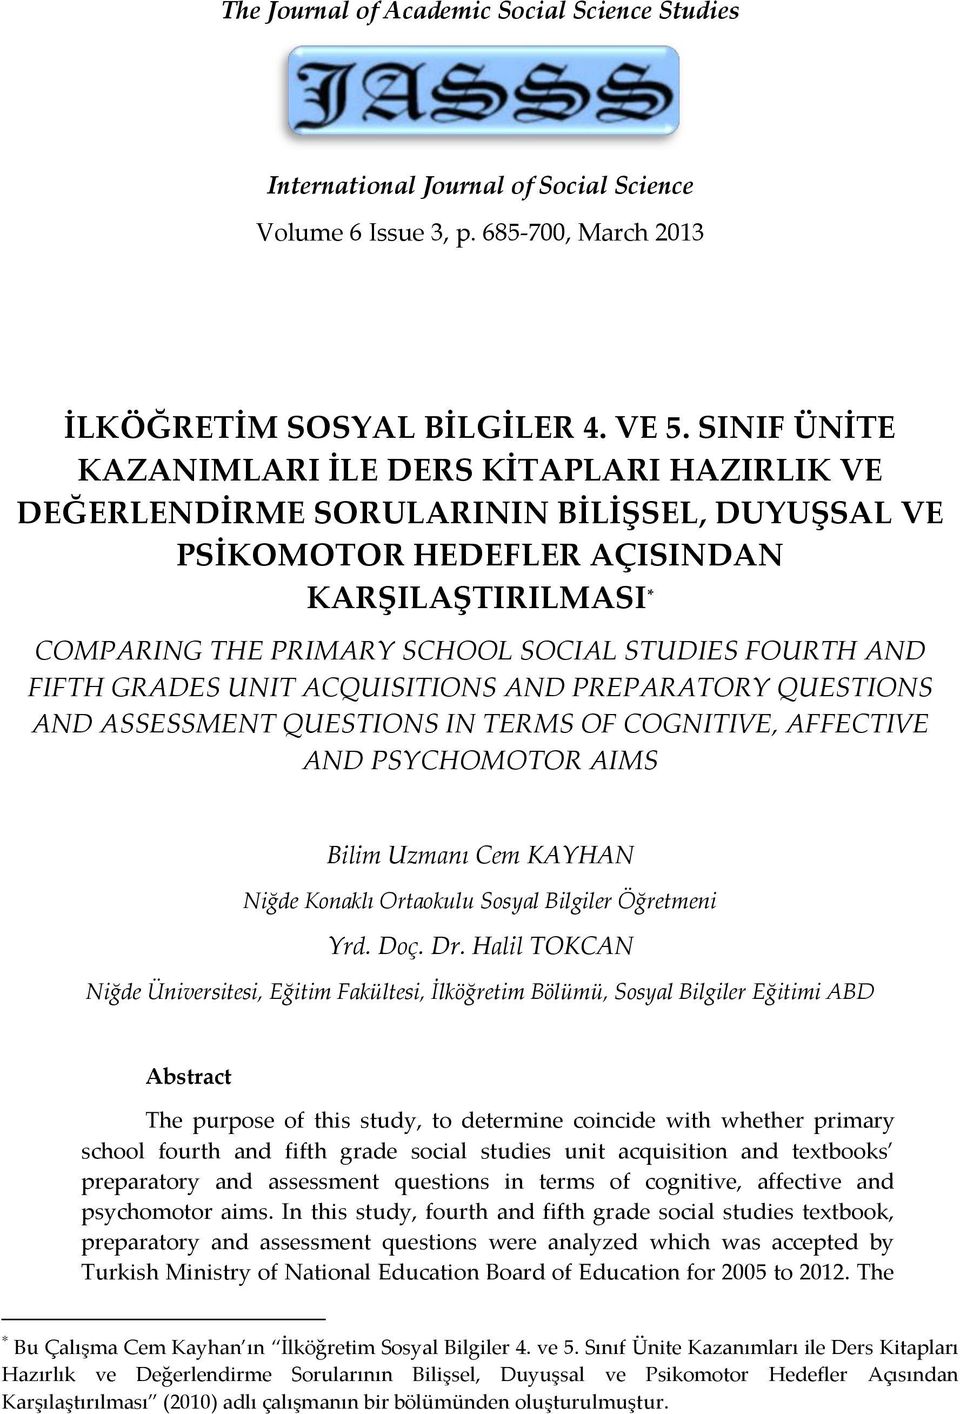 FOURTH AND FIFTH GRADES UNIT ACQUISITIONS AND PREPARATORY QUESTIONS AND ASSESSMENT QUESTIONS IN TERMS OF COGNITIVE, AFFECTIVE AND PSYCHOMOTOR AIMS Bilim Uzmanı Cem KAYHAN Niğde Konaklı Ortaokulu